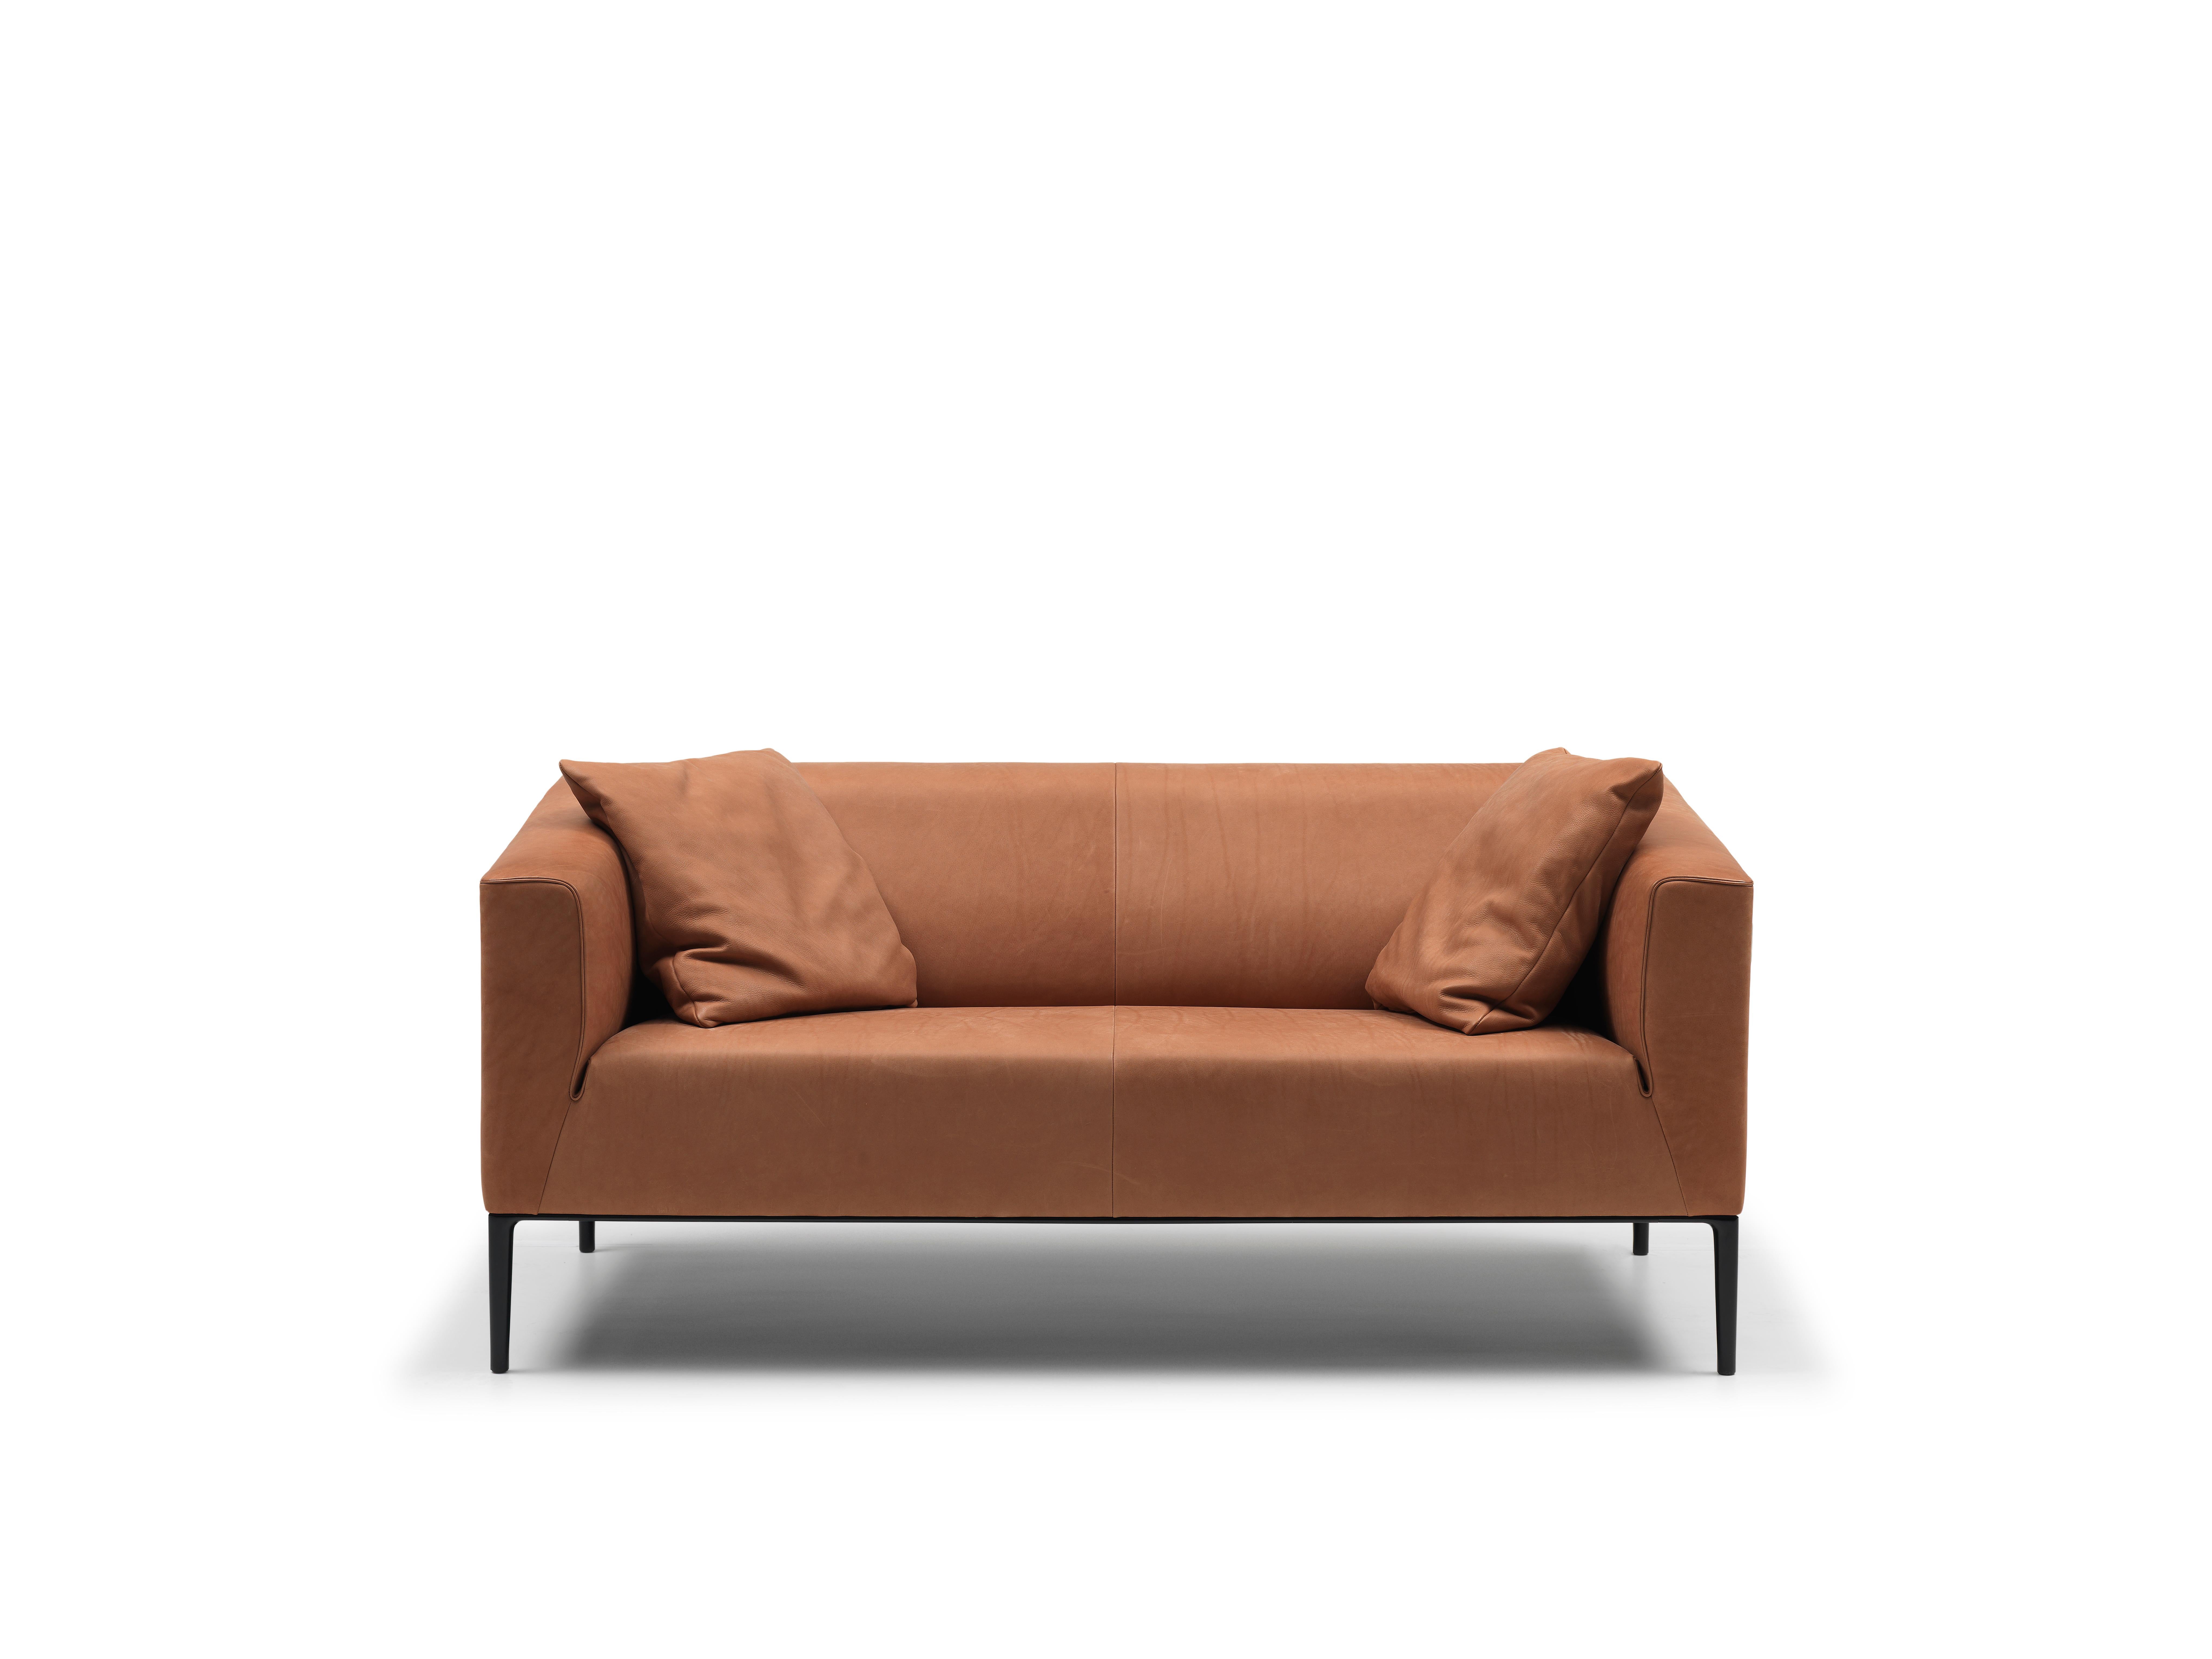 Set of DS-161 sofa and 2 cushions by De Sede
Dimensions: 
Sofa: D 54 x W 157 x H 72 cm
Cushions: D 45 x W 45 x H 12 cm
Materials: aluminium, leather

Prices may change according to the chosen materials and size. 

A linear outer contour and